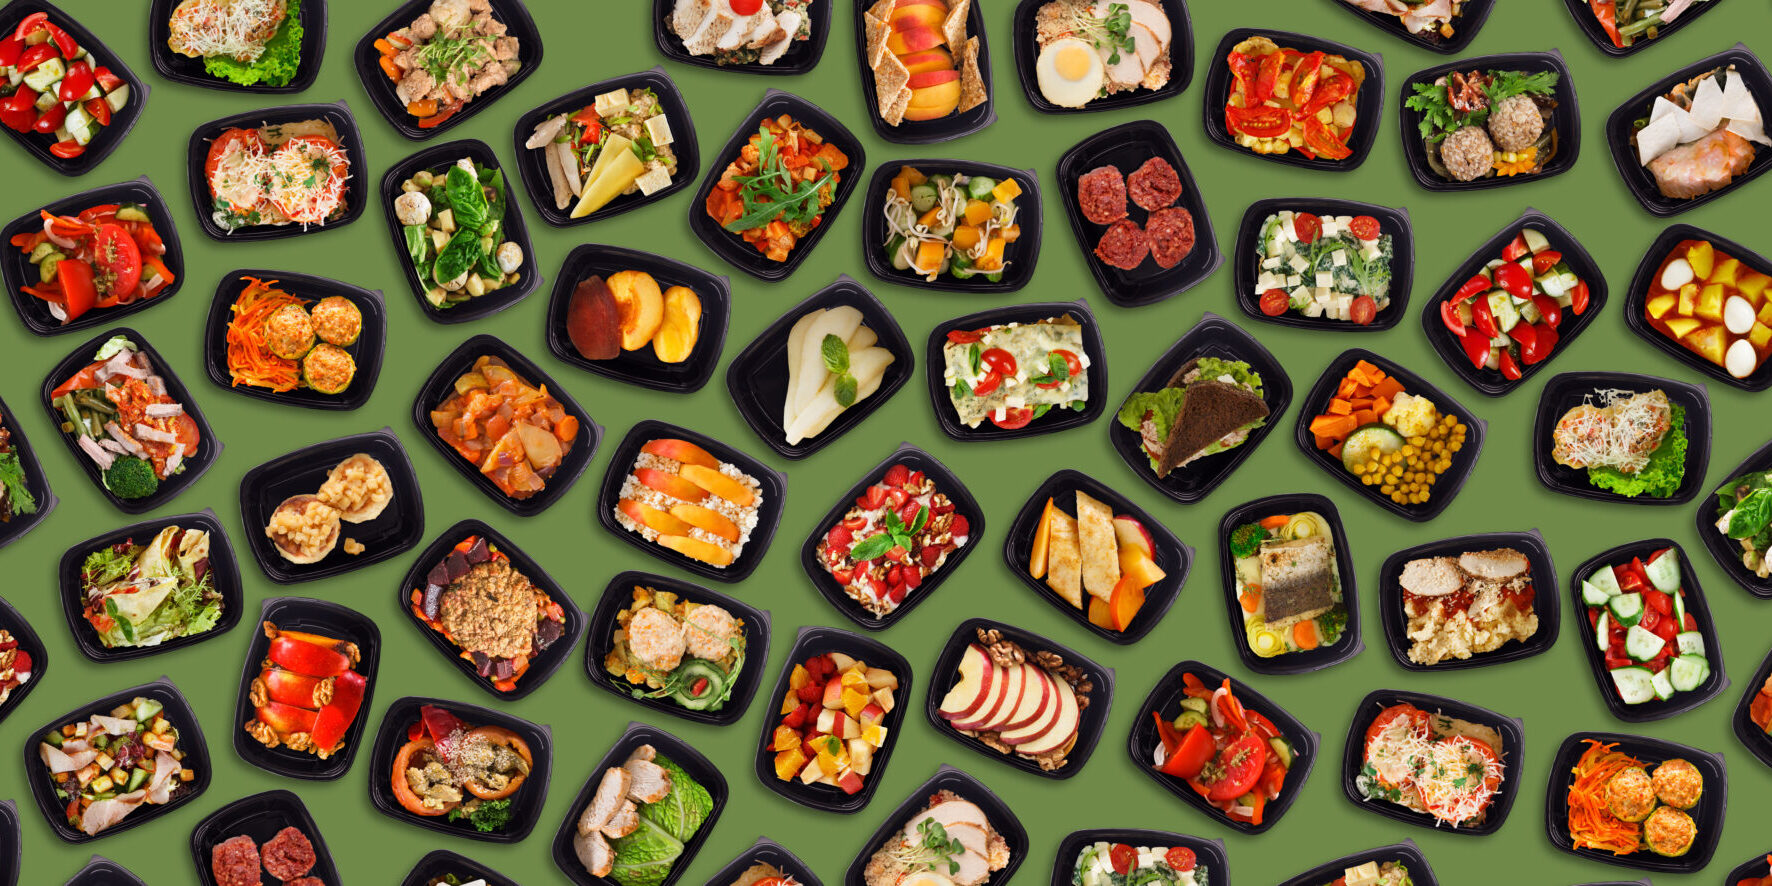 Healthy trays of food in a collage on a green background.